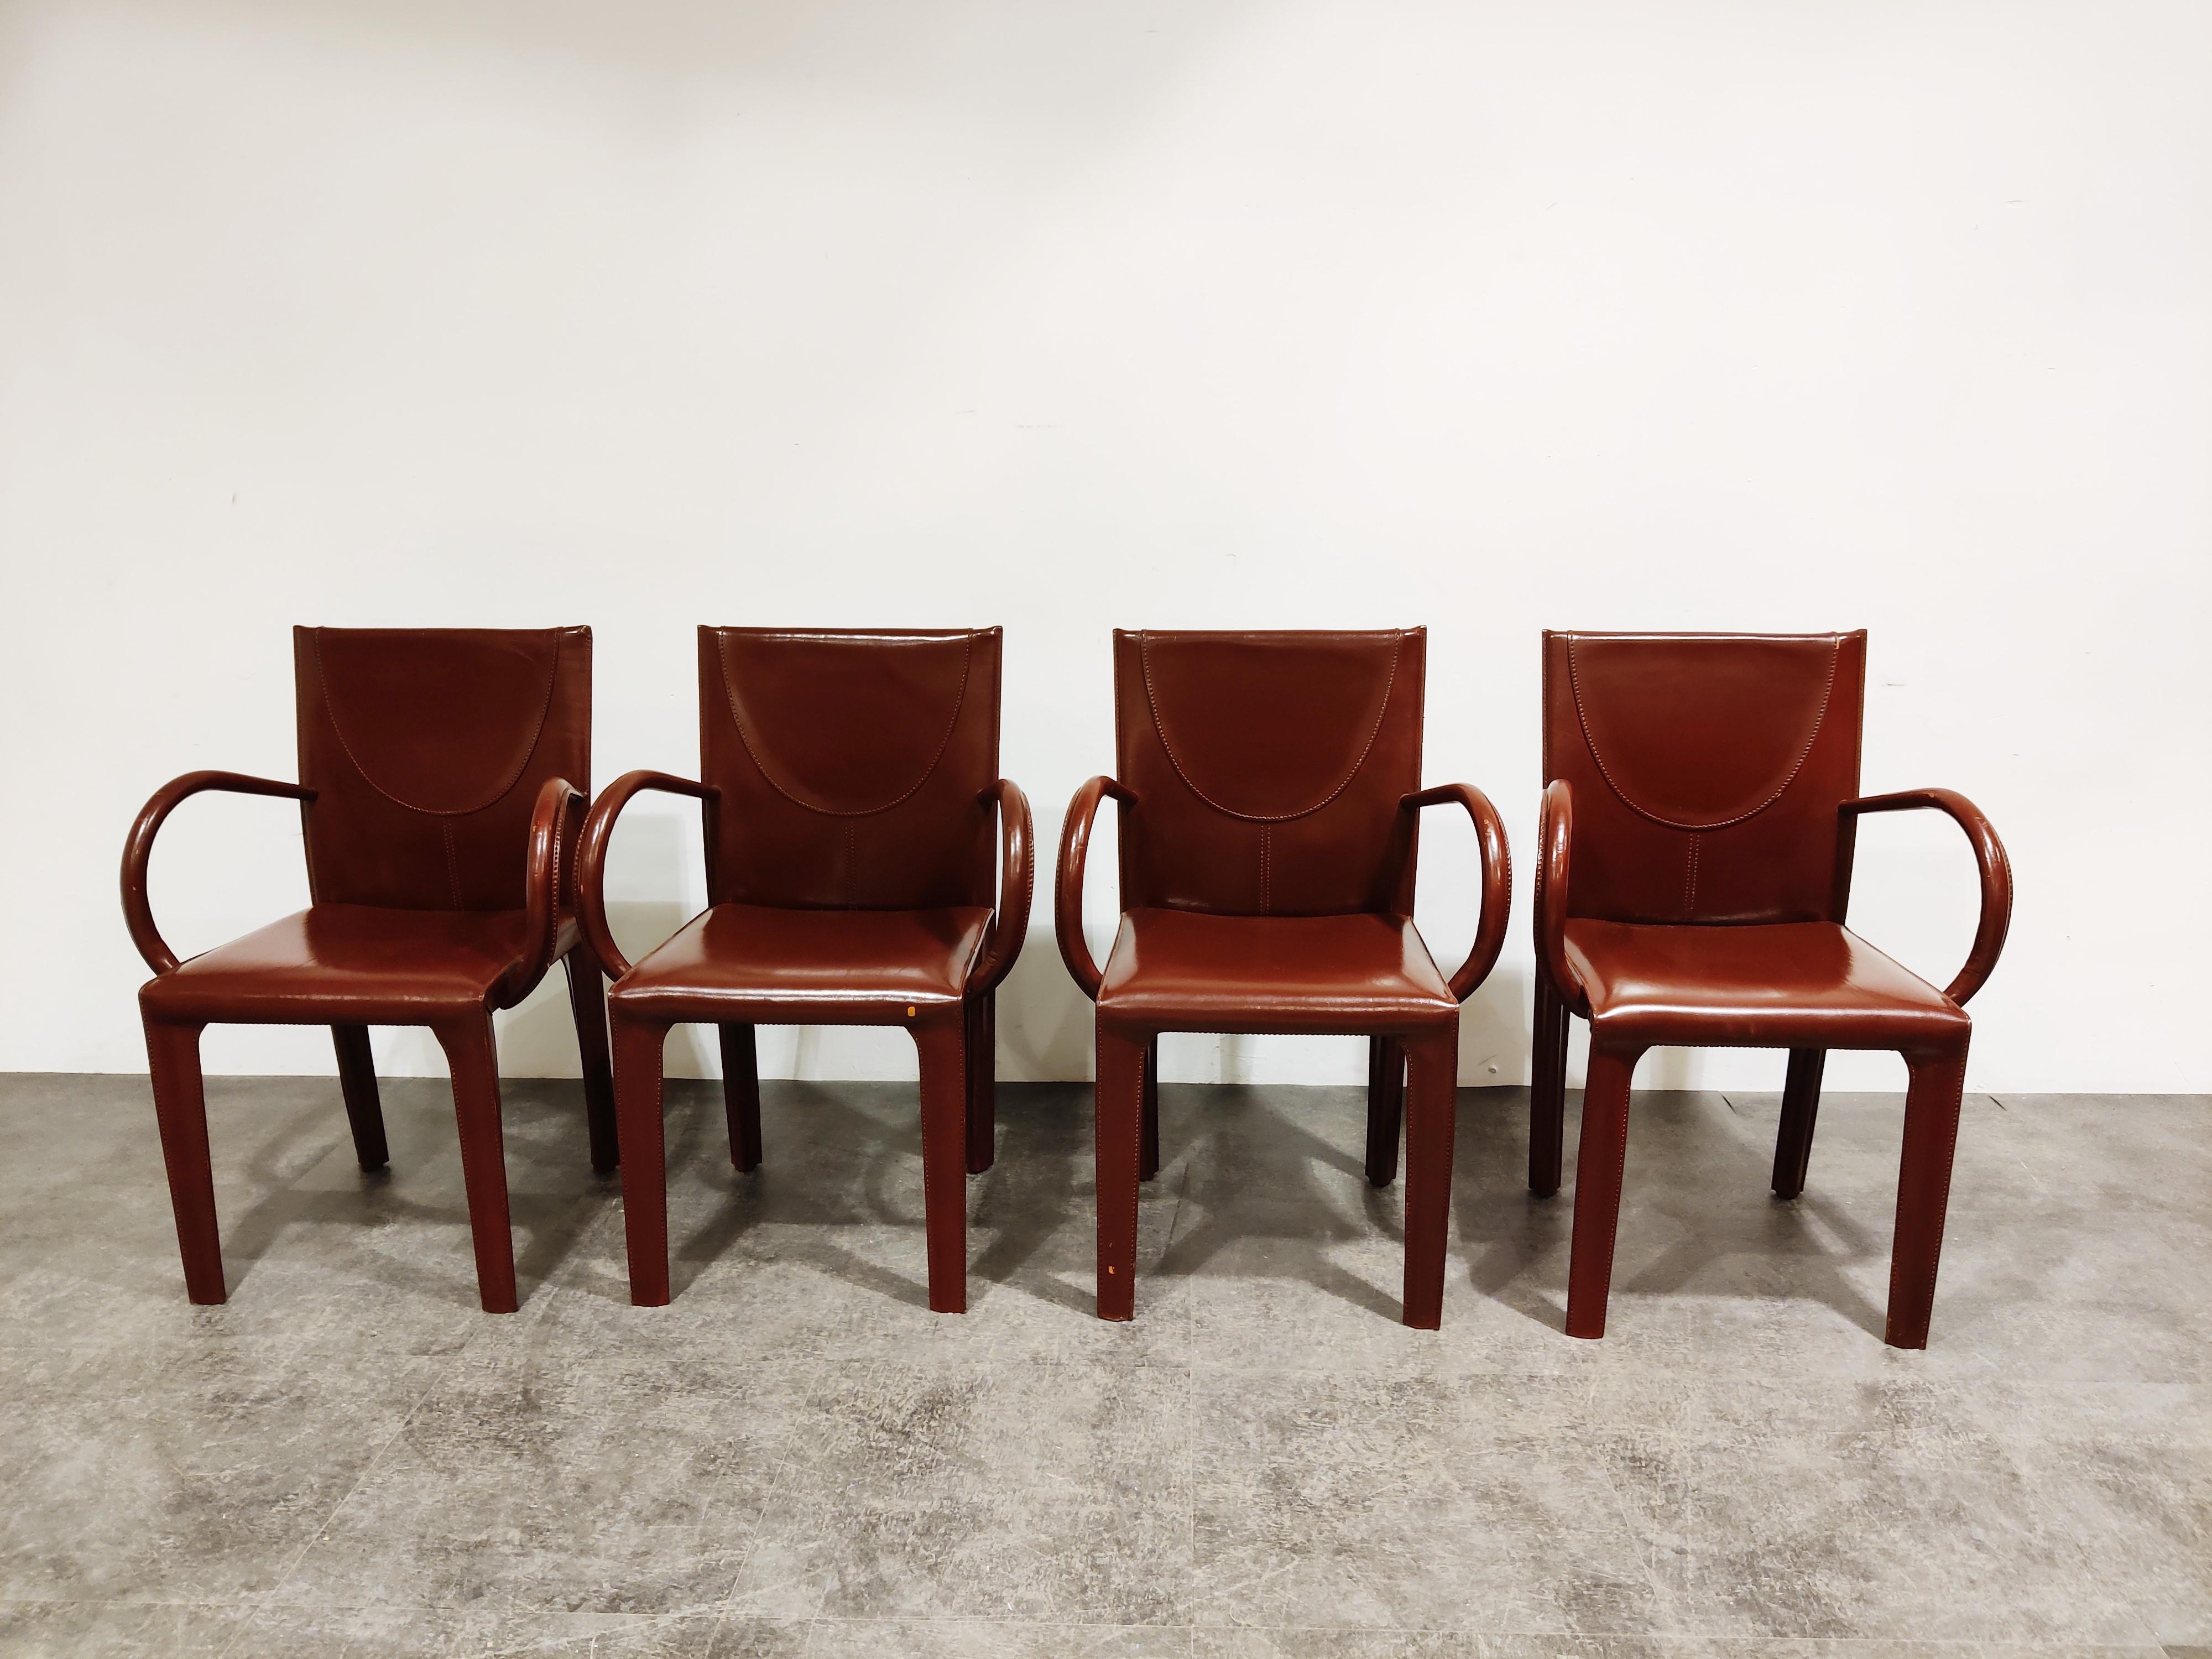 Vintage red coloured leather dining chairs with armrests by Arper.

Nicely stitched leather with elegant armrests.

Deep red colour. 

Good condition

All stamped with maker's mark. 

Dimensions:
Height: 87cm/34.25